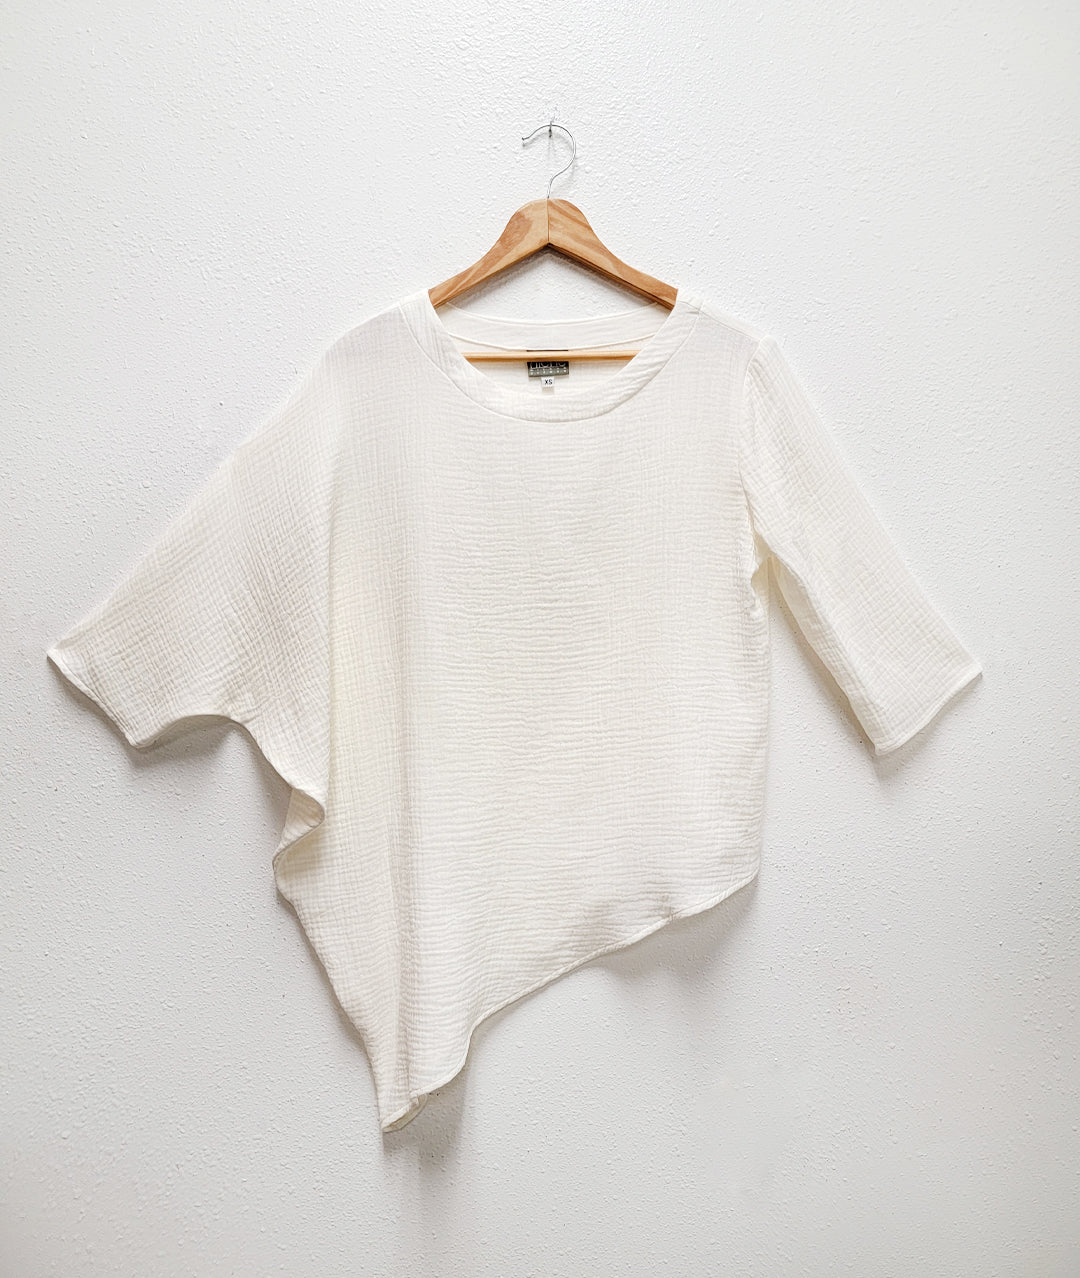 asymmetrical white top with one draped side and sleeve